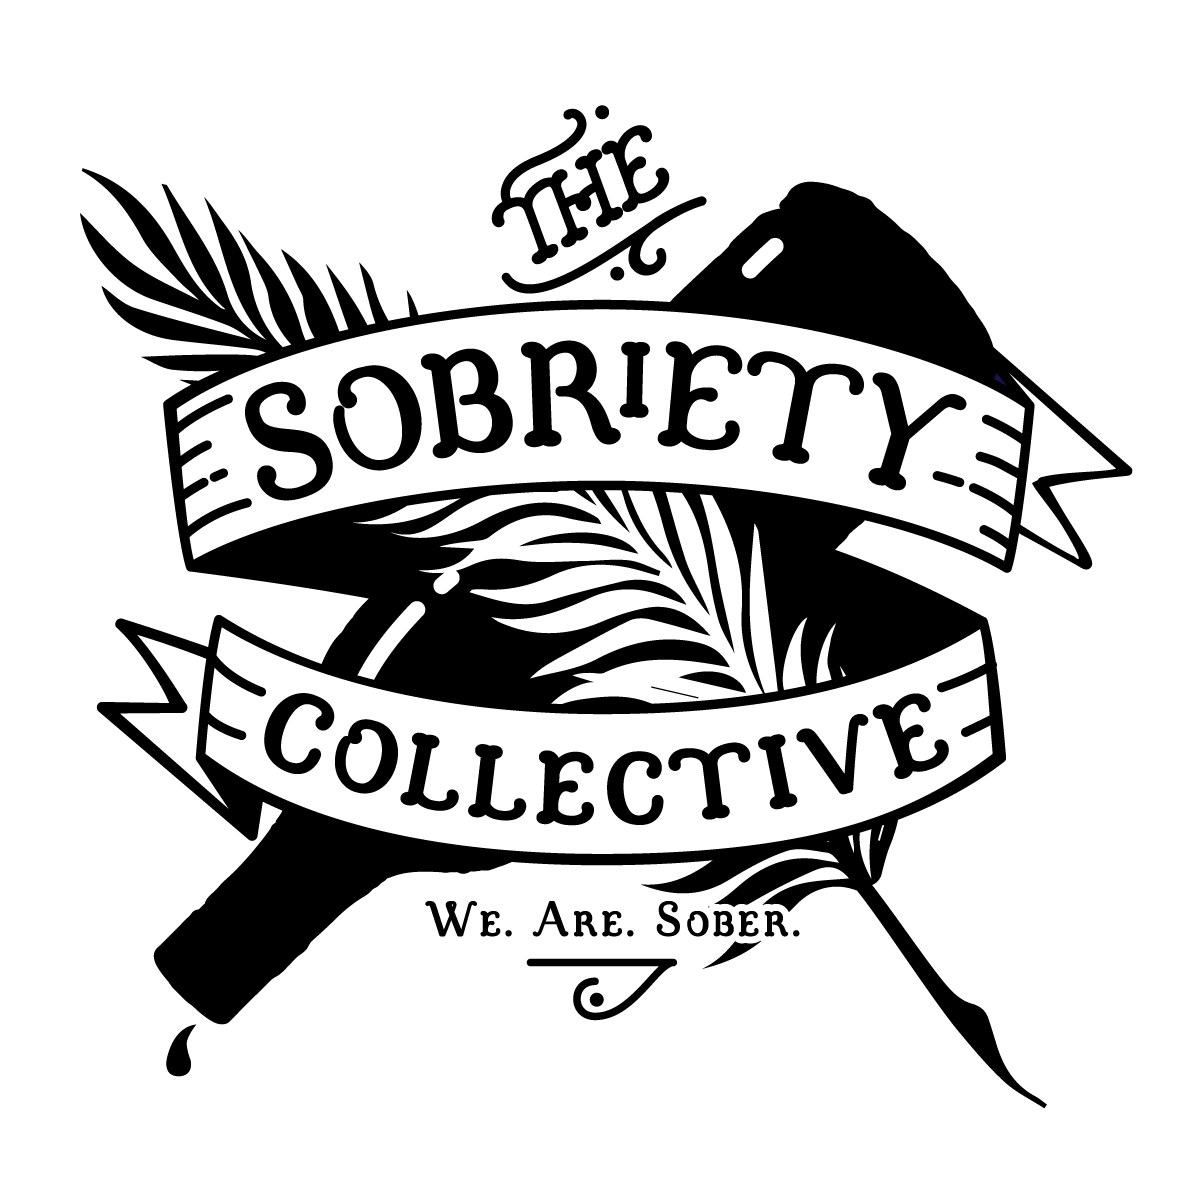 The Sobriety Collective